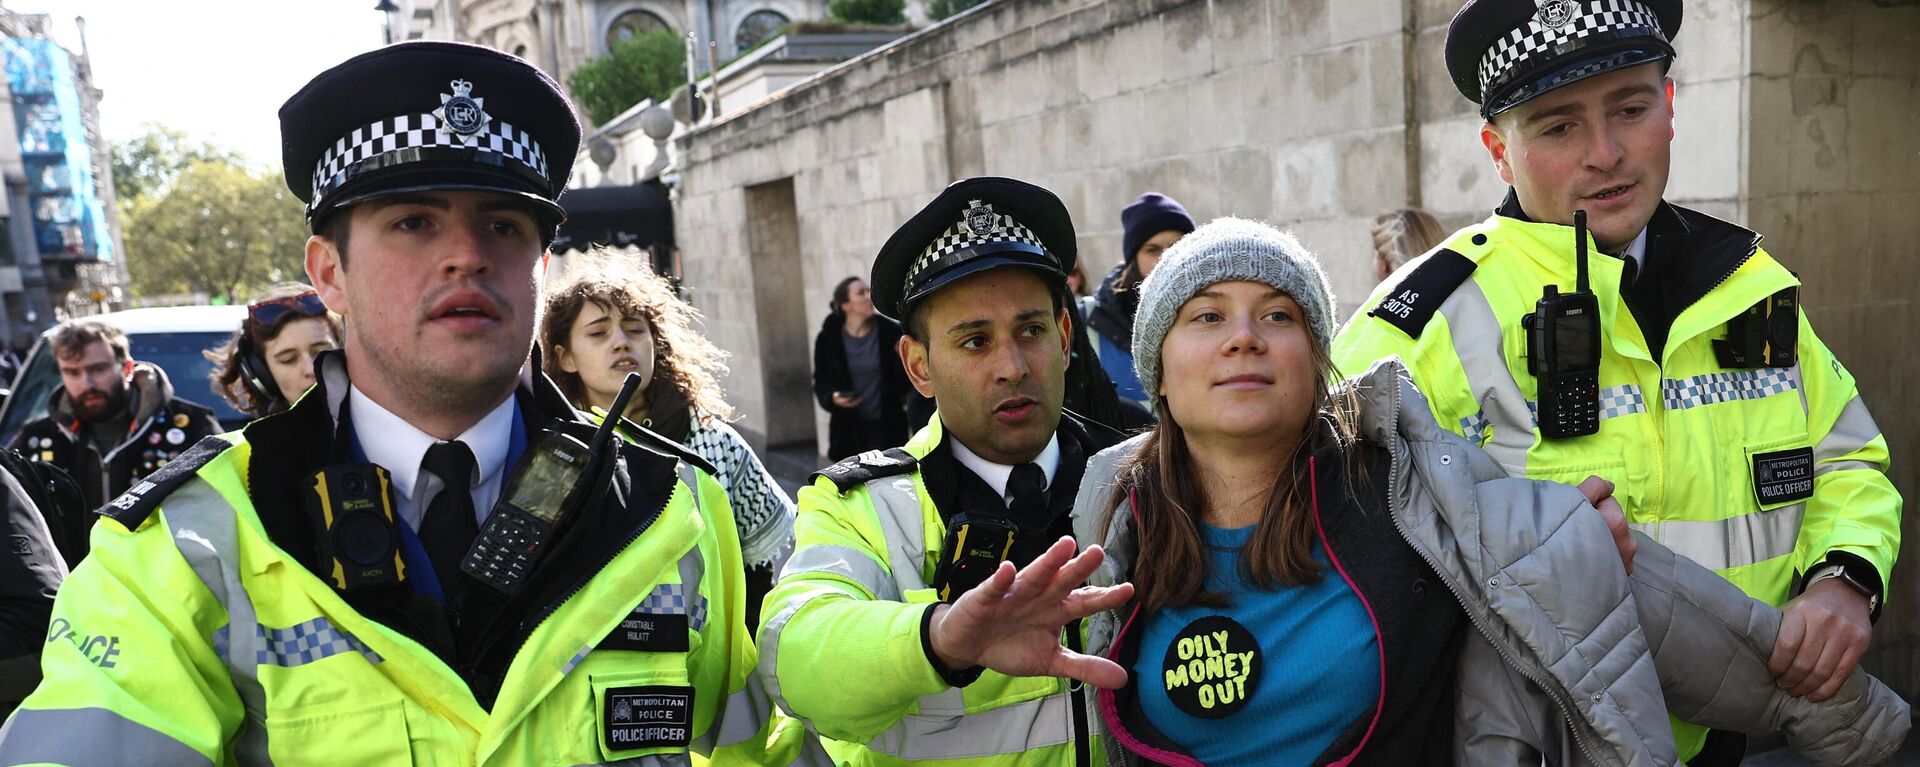 Swedish climate activist Greta Thunberg is arrested outside the InterContinental London Park Lane during the Oily Money Out demonstration organised by Fossil Free London and Greenpeace on the sidelines of the opening day of the Energy Intelligence Forum 2023 in London on October 17, 2023. - Sputnik International, 1920, 17.10.2023